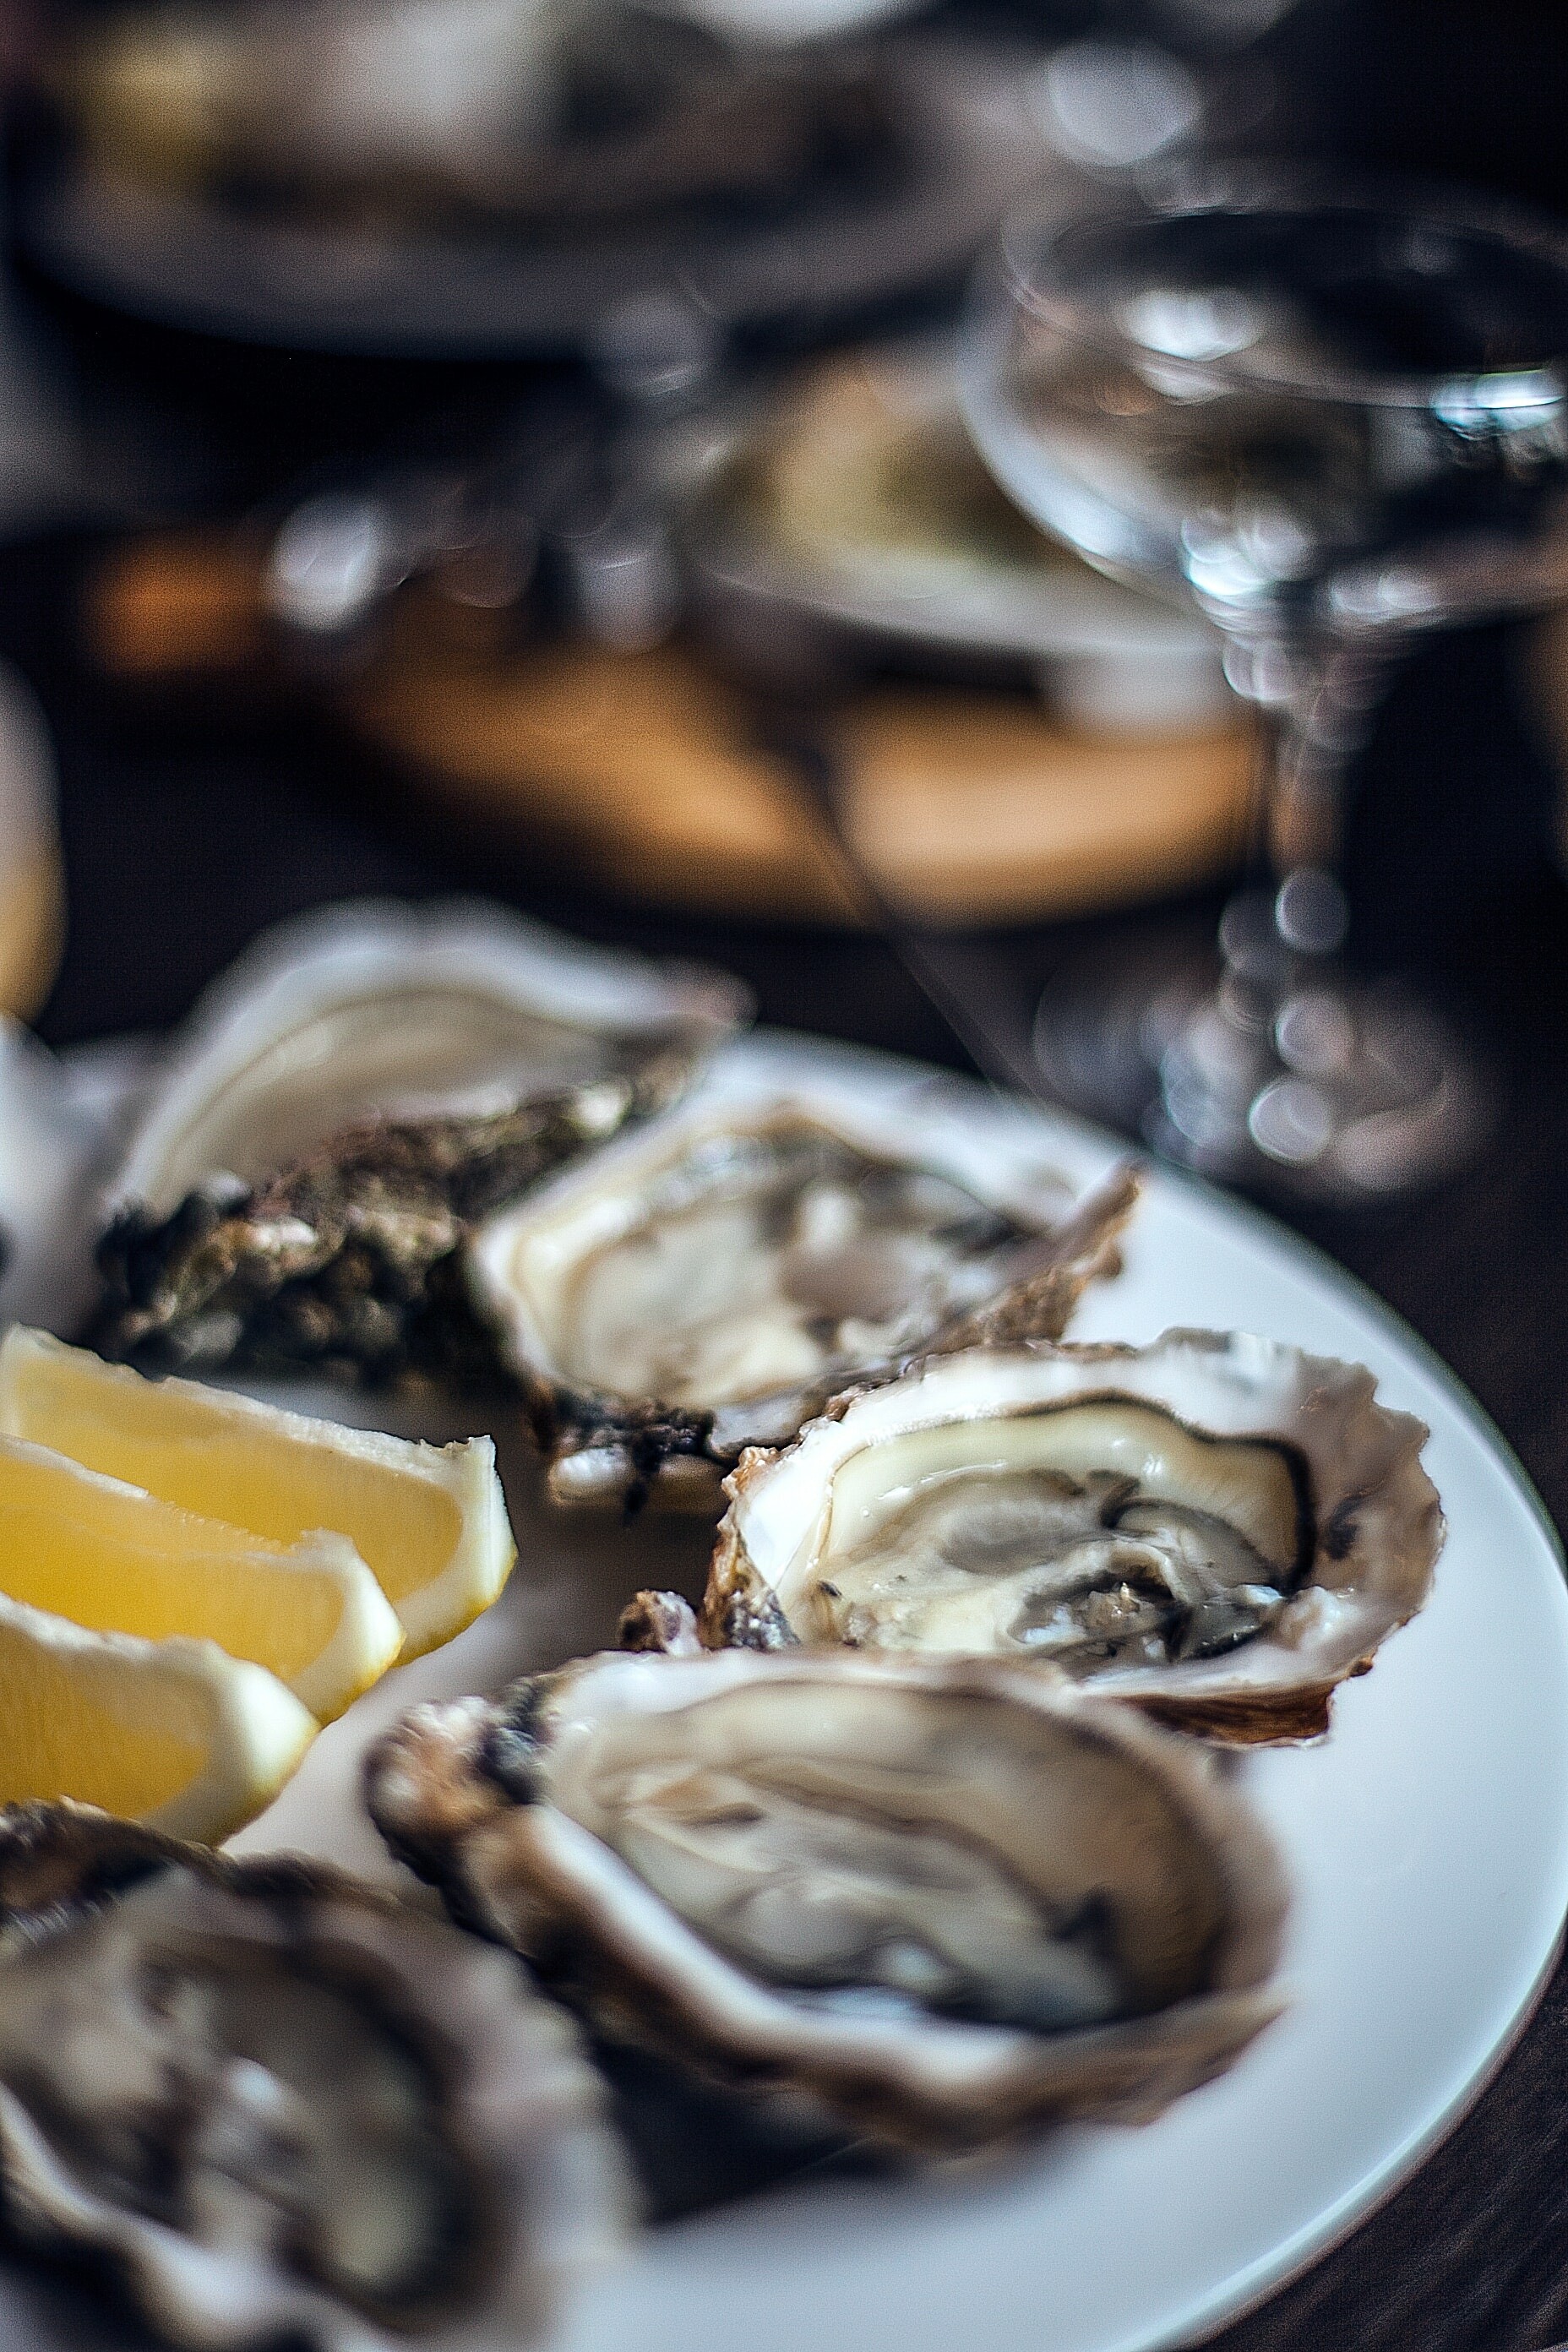 How To Eat Oysters: A Guide From An Etiquette Expert